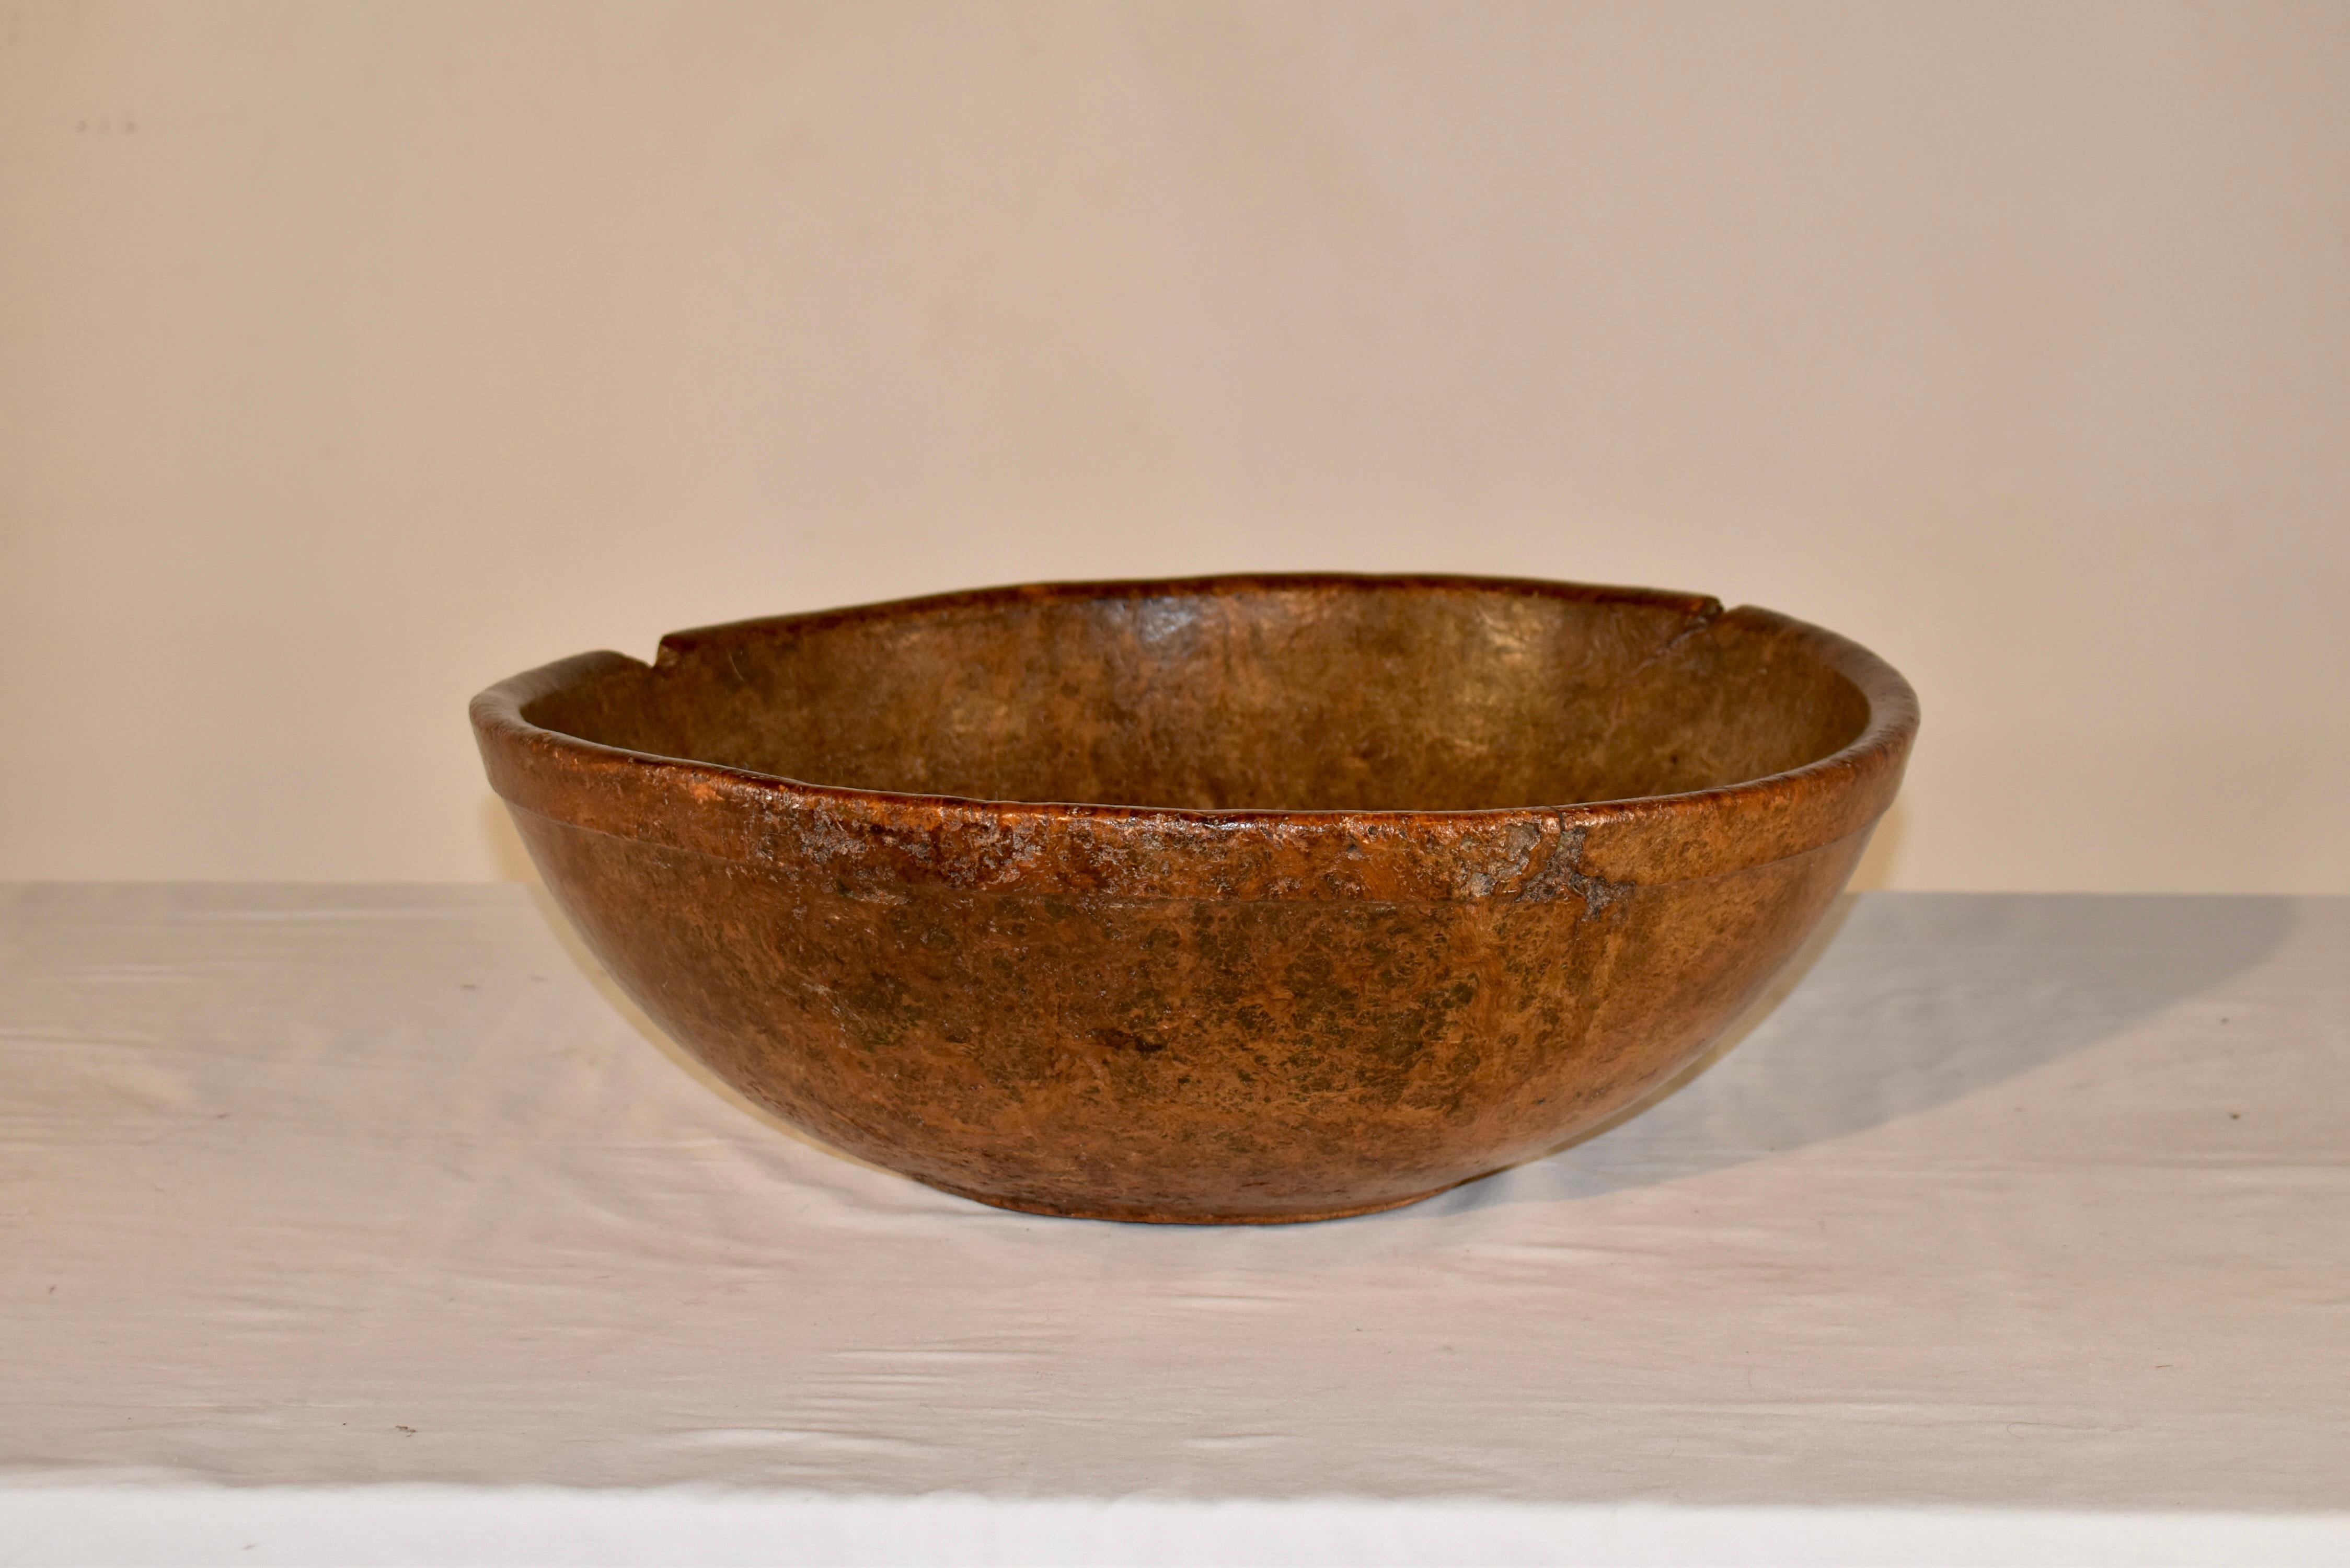 RARE 18th century American burl bowl.  This piece is wonderfully hand turned and the wood is GORGEOUS!  It looks alive in the light!  This bowl is from the period of time in America when we were fighting for our Independence from Britain.  If only